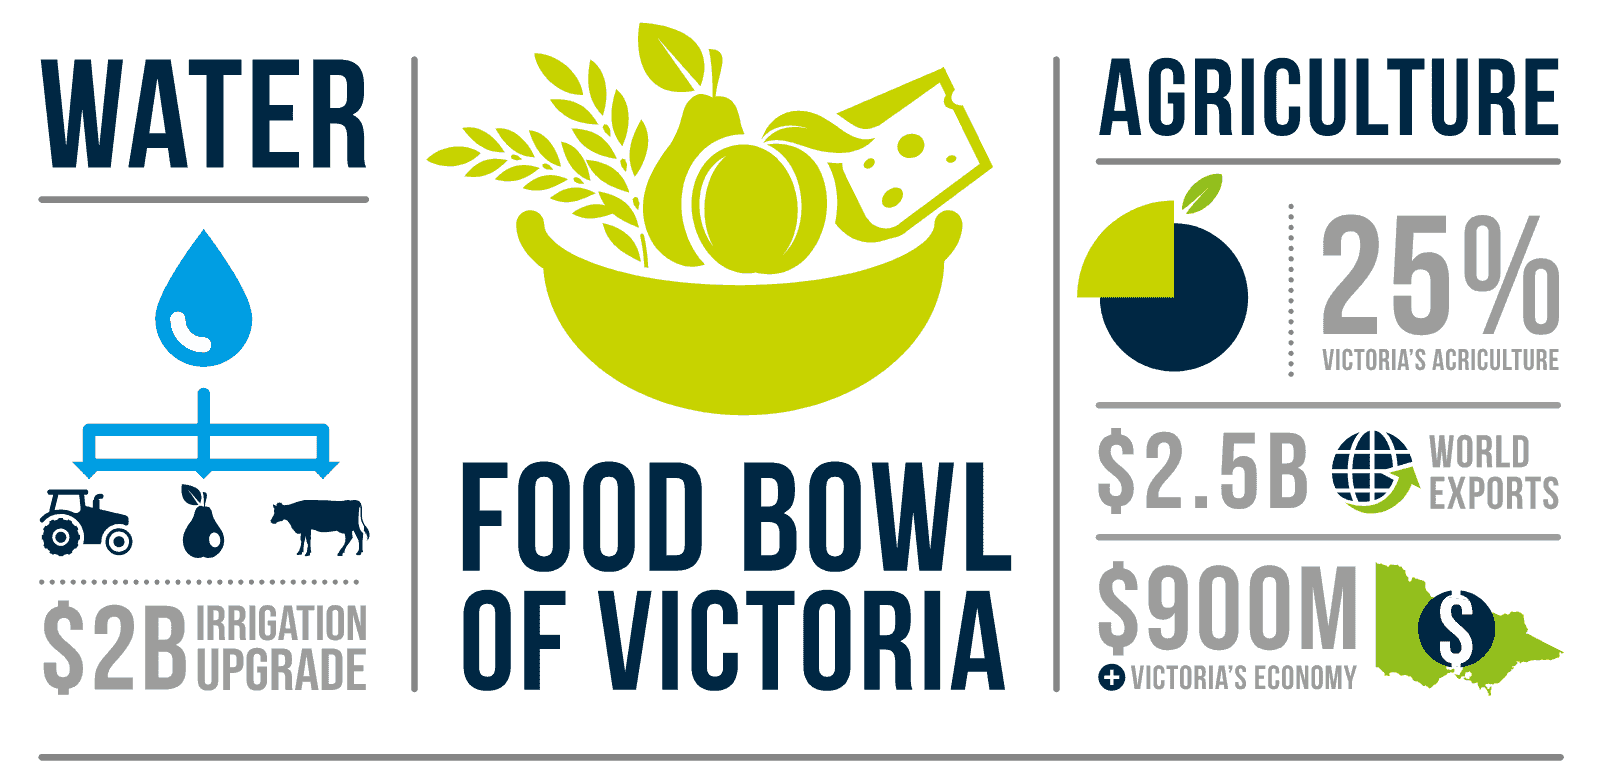 As the heart of the Foodbowl, 25% of Victoria’s agriculture is produced here contributing $900m annually to the Victorian economy and $2.5B in exports. $2B investment into our state of the art, world class irrigation delivery system. 